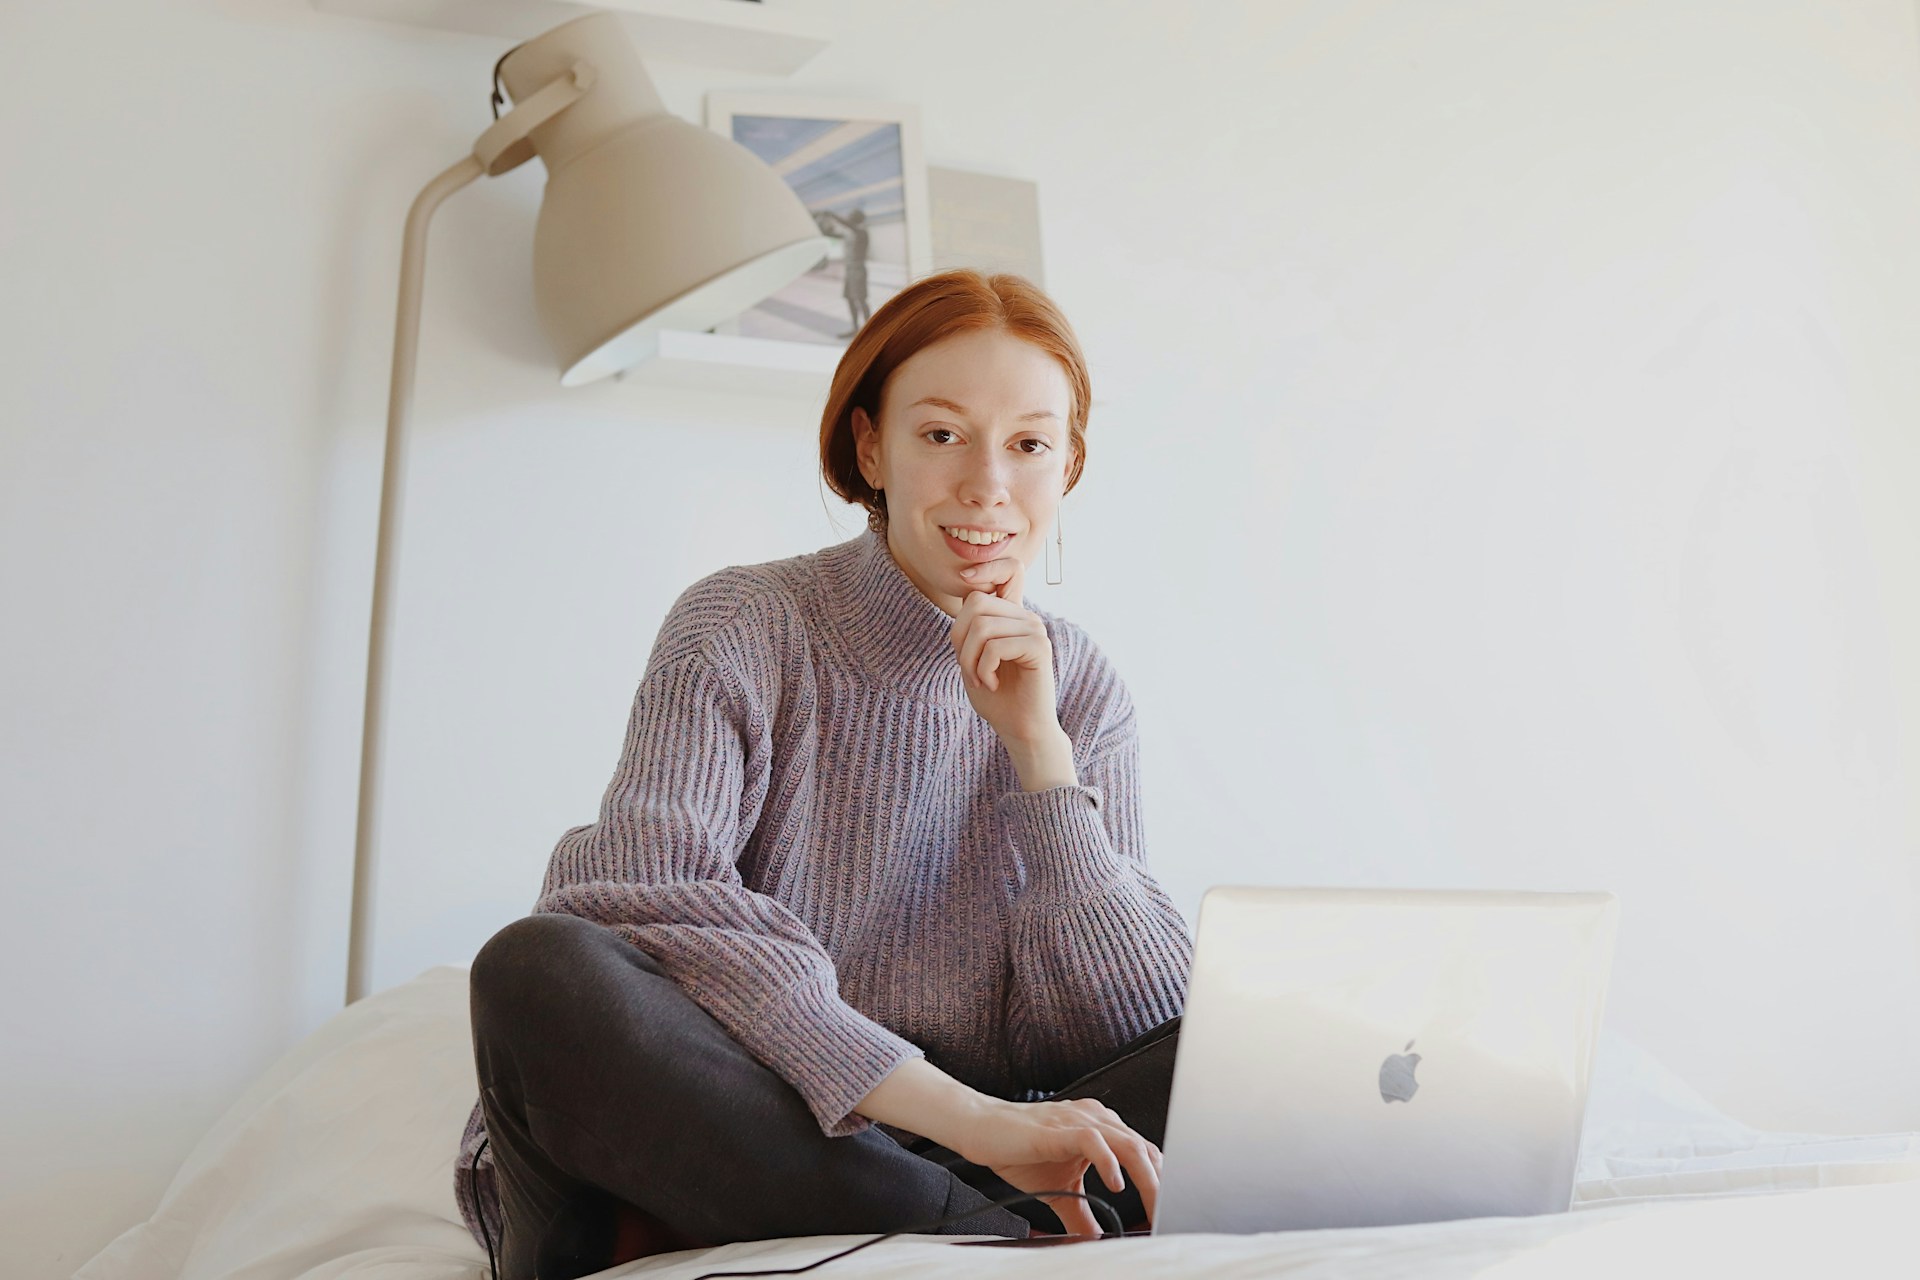 A smiling woman sitting on a bed with a laptop.